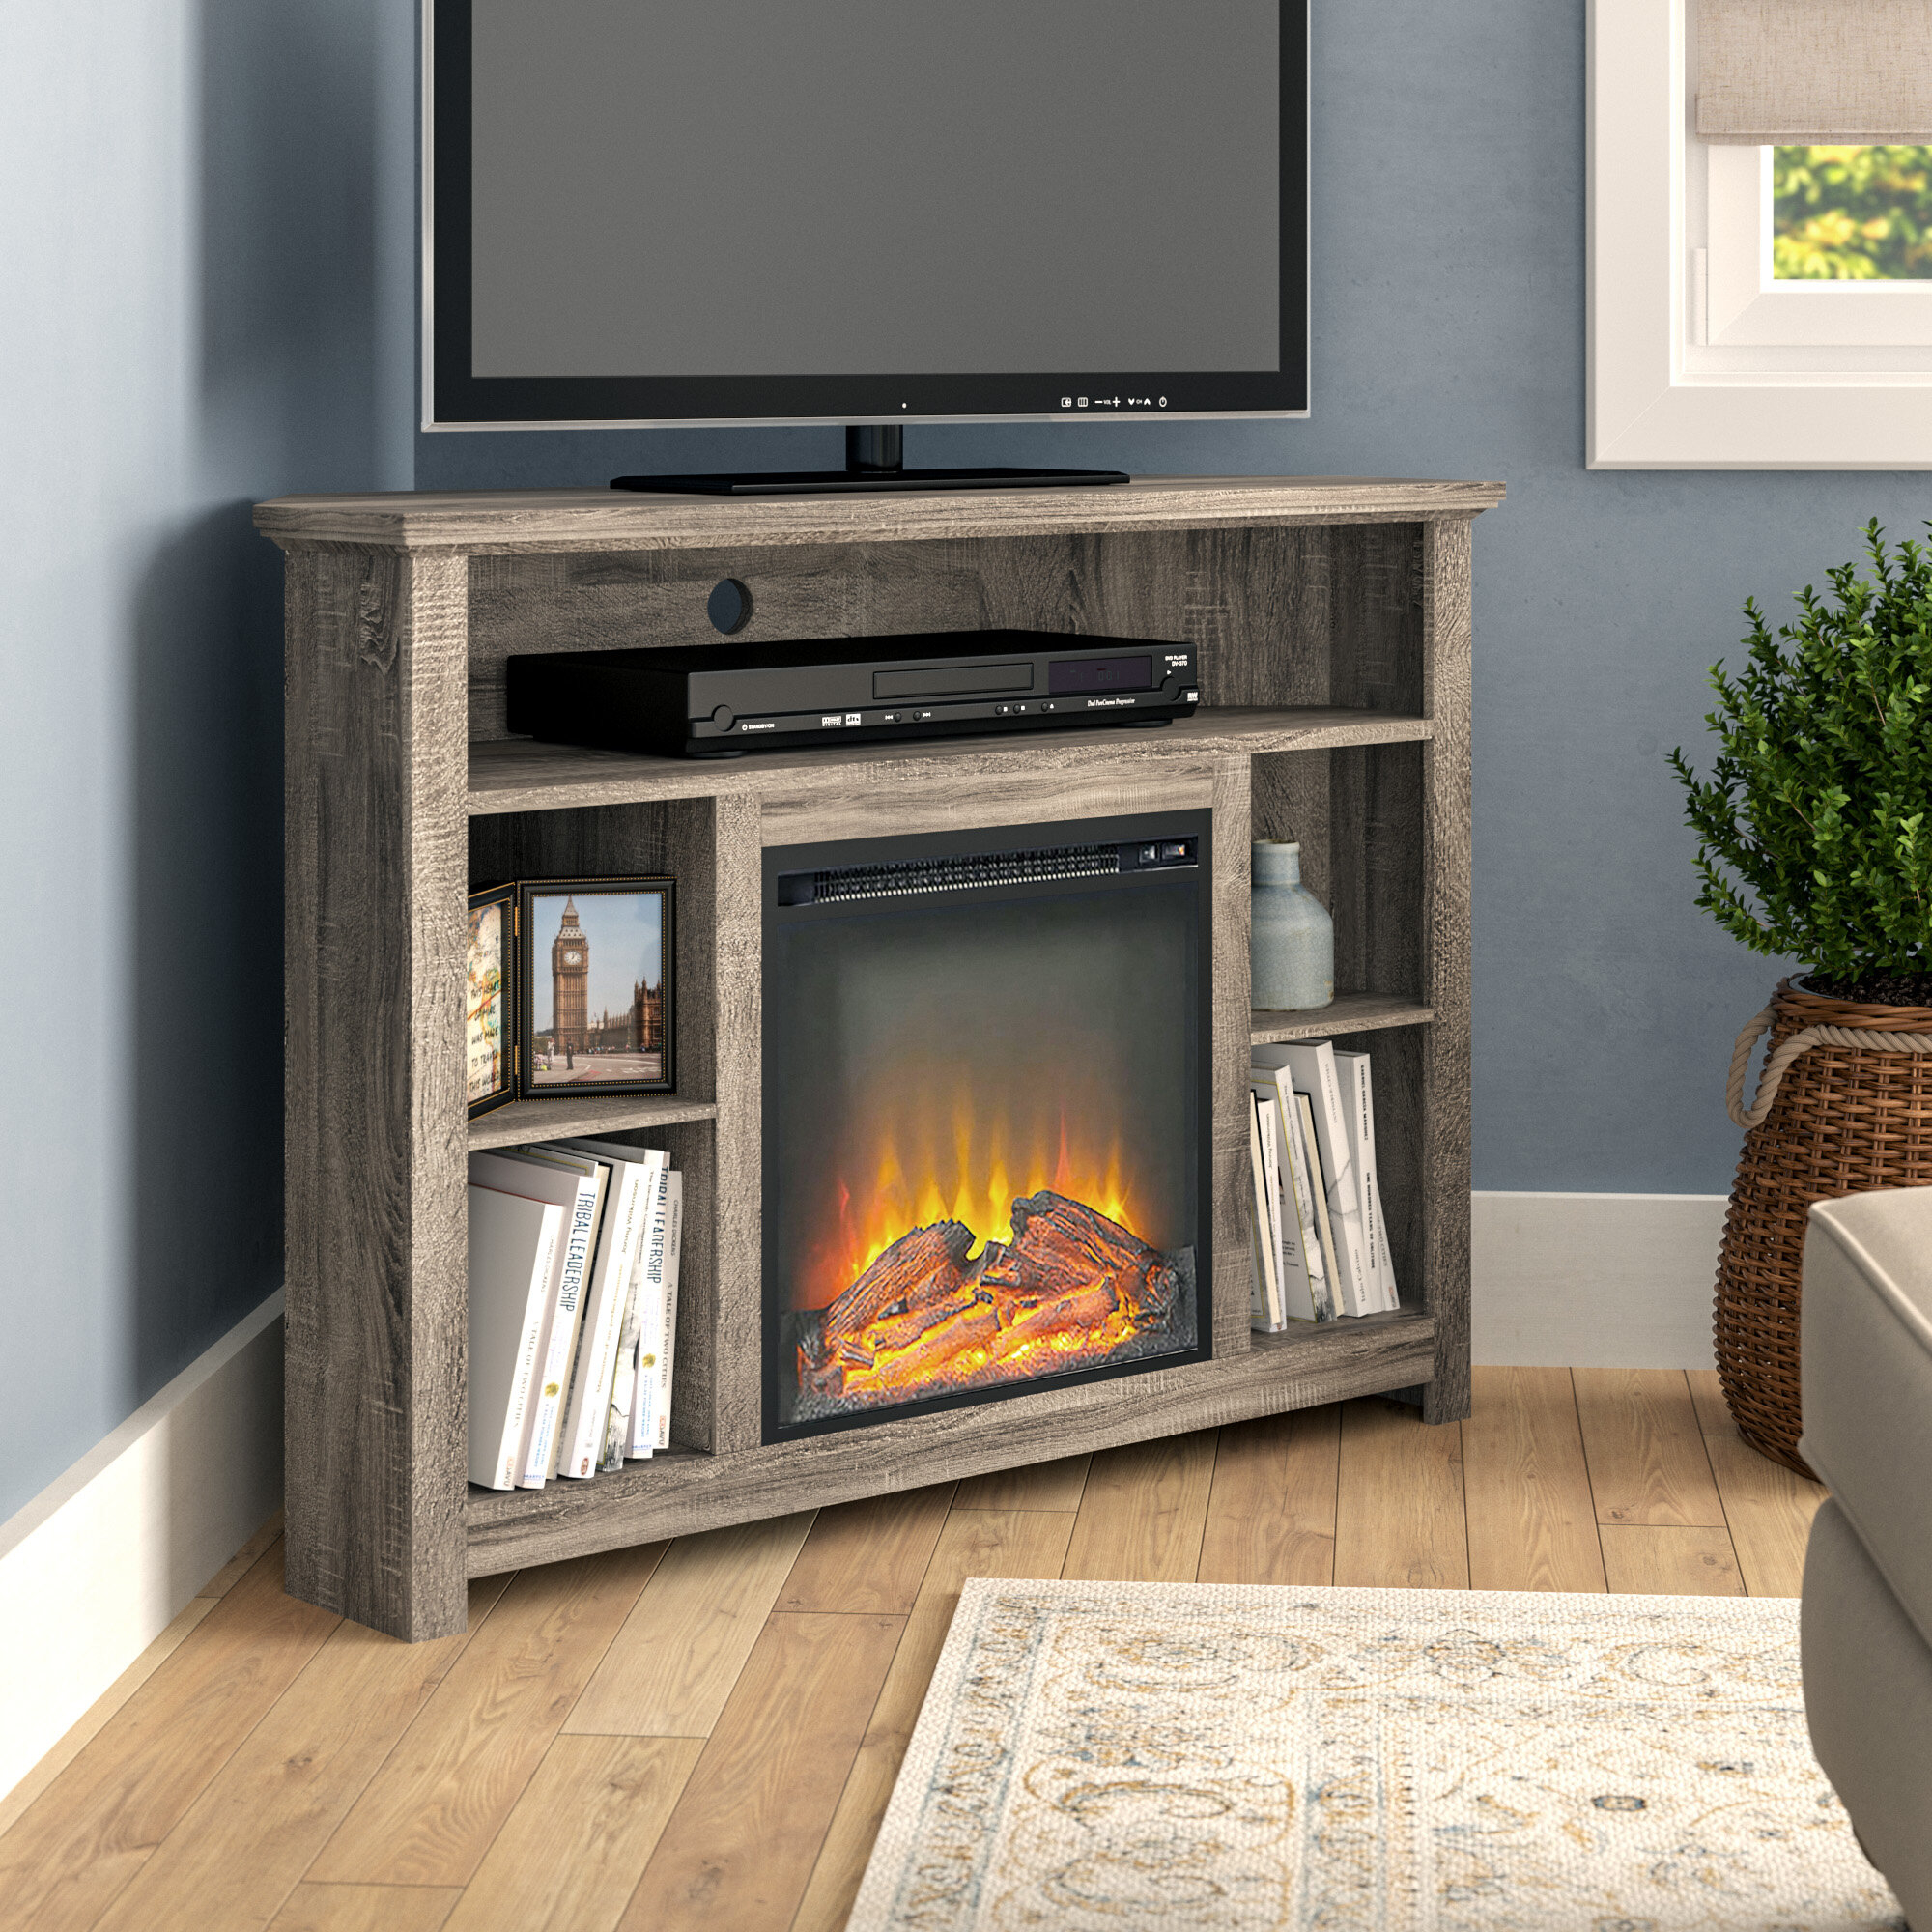 Senecaville TV Stand for TVs up to 50" with Electric Fireplace Included